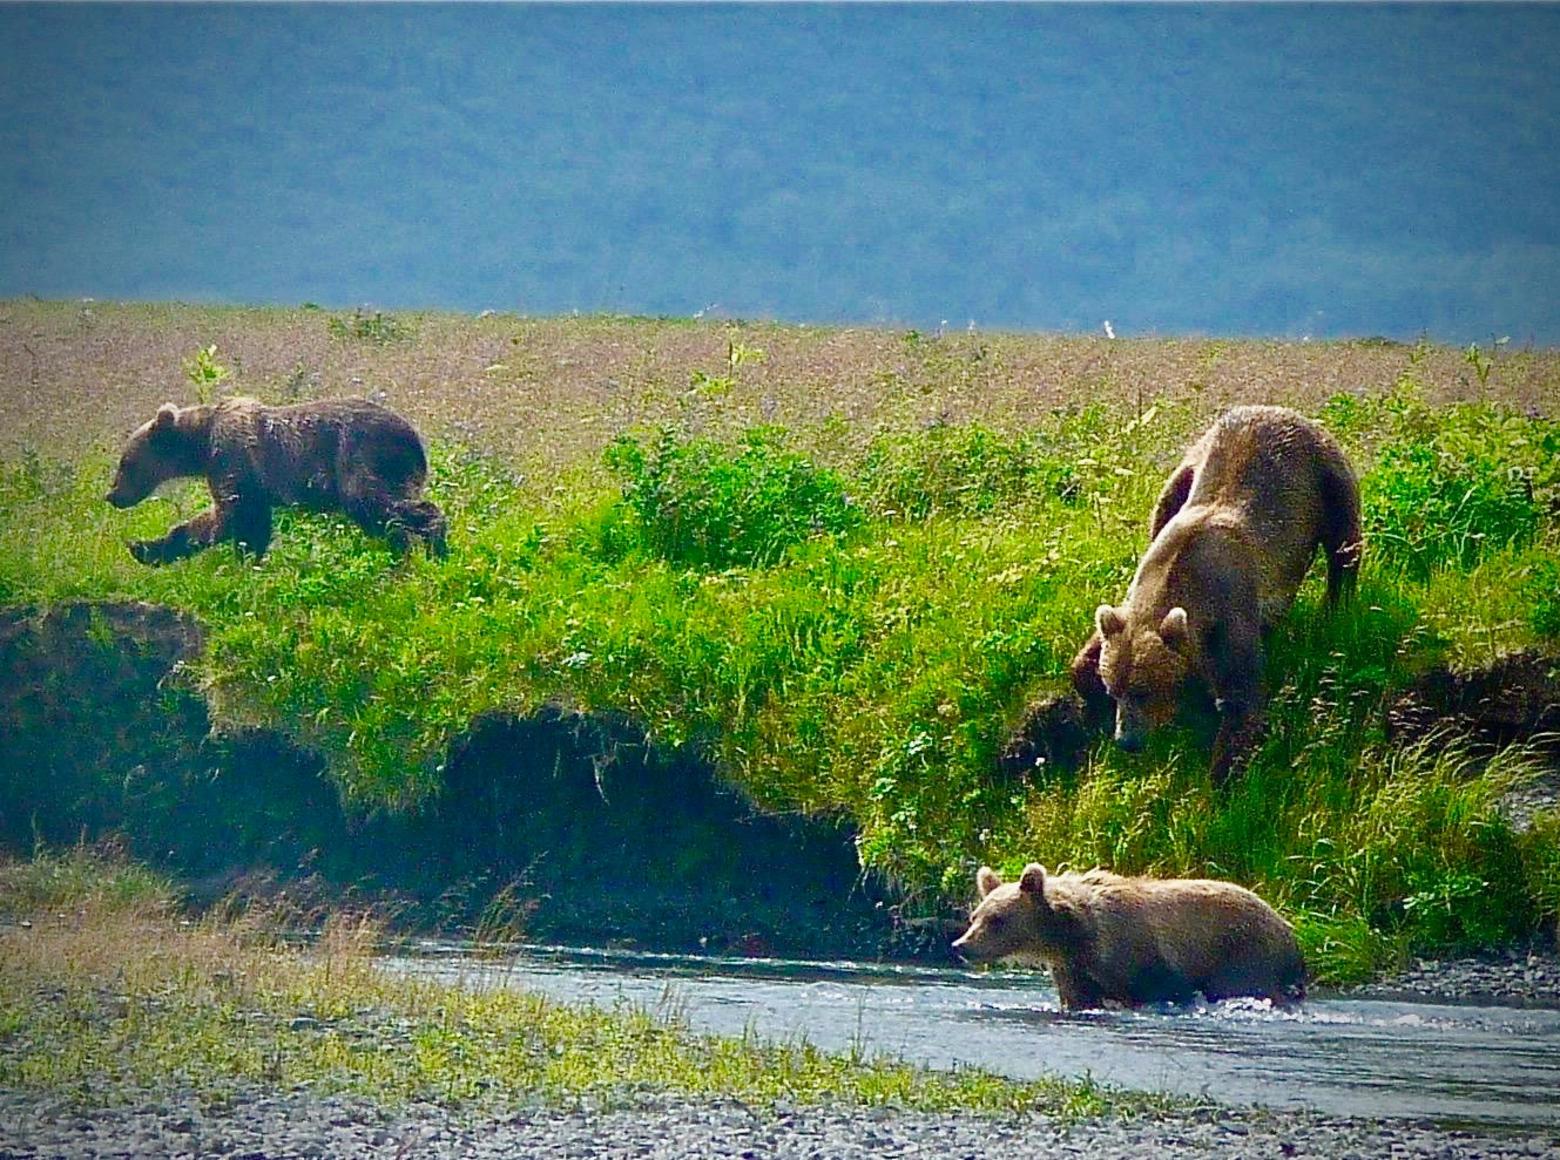 A mother grizzly and cubs looking for a safe river crossing. Photo by Richard Louv